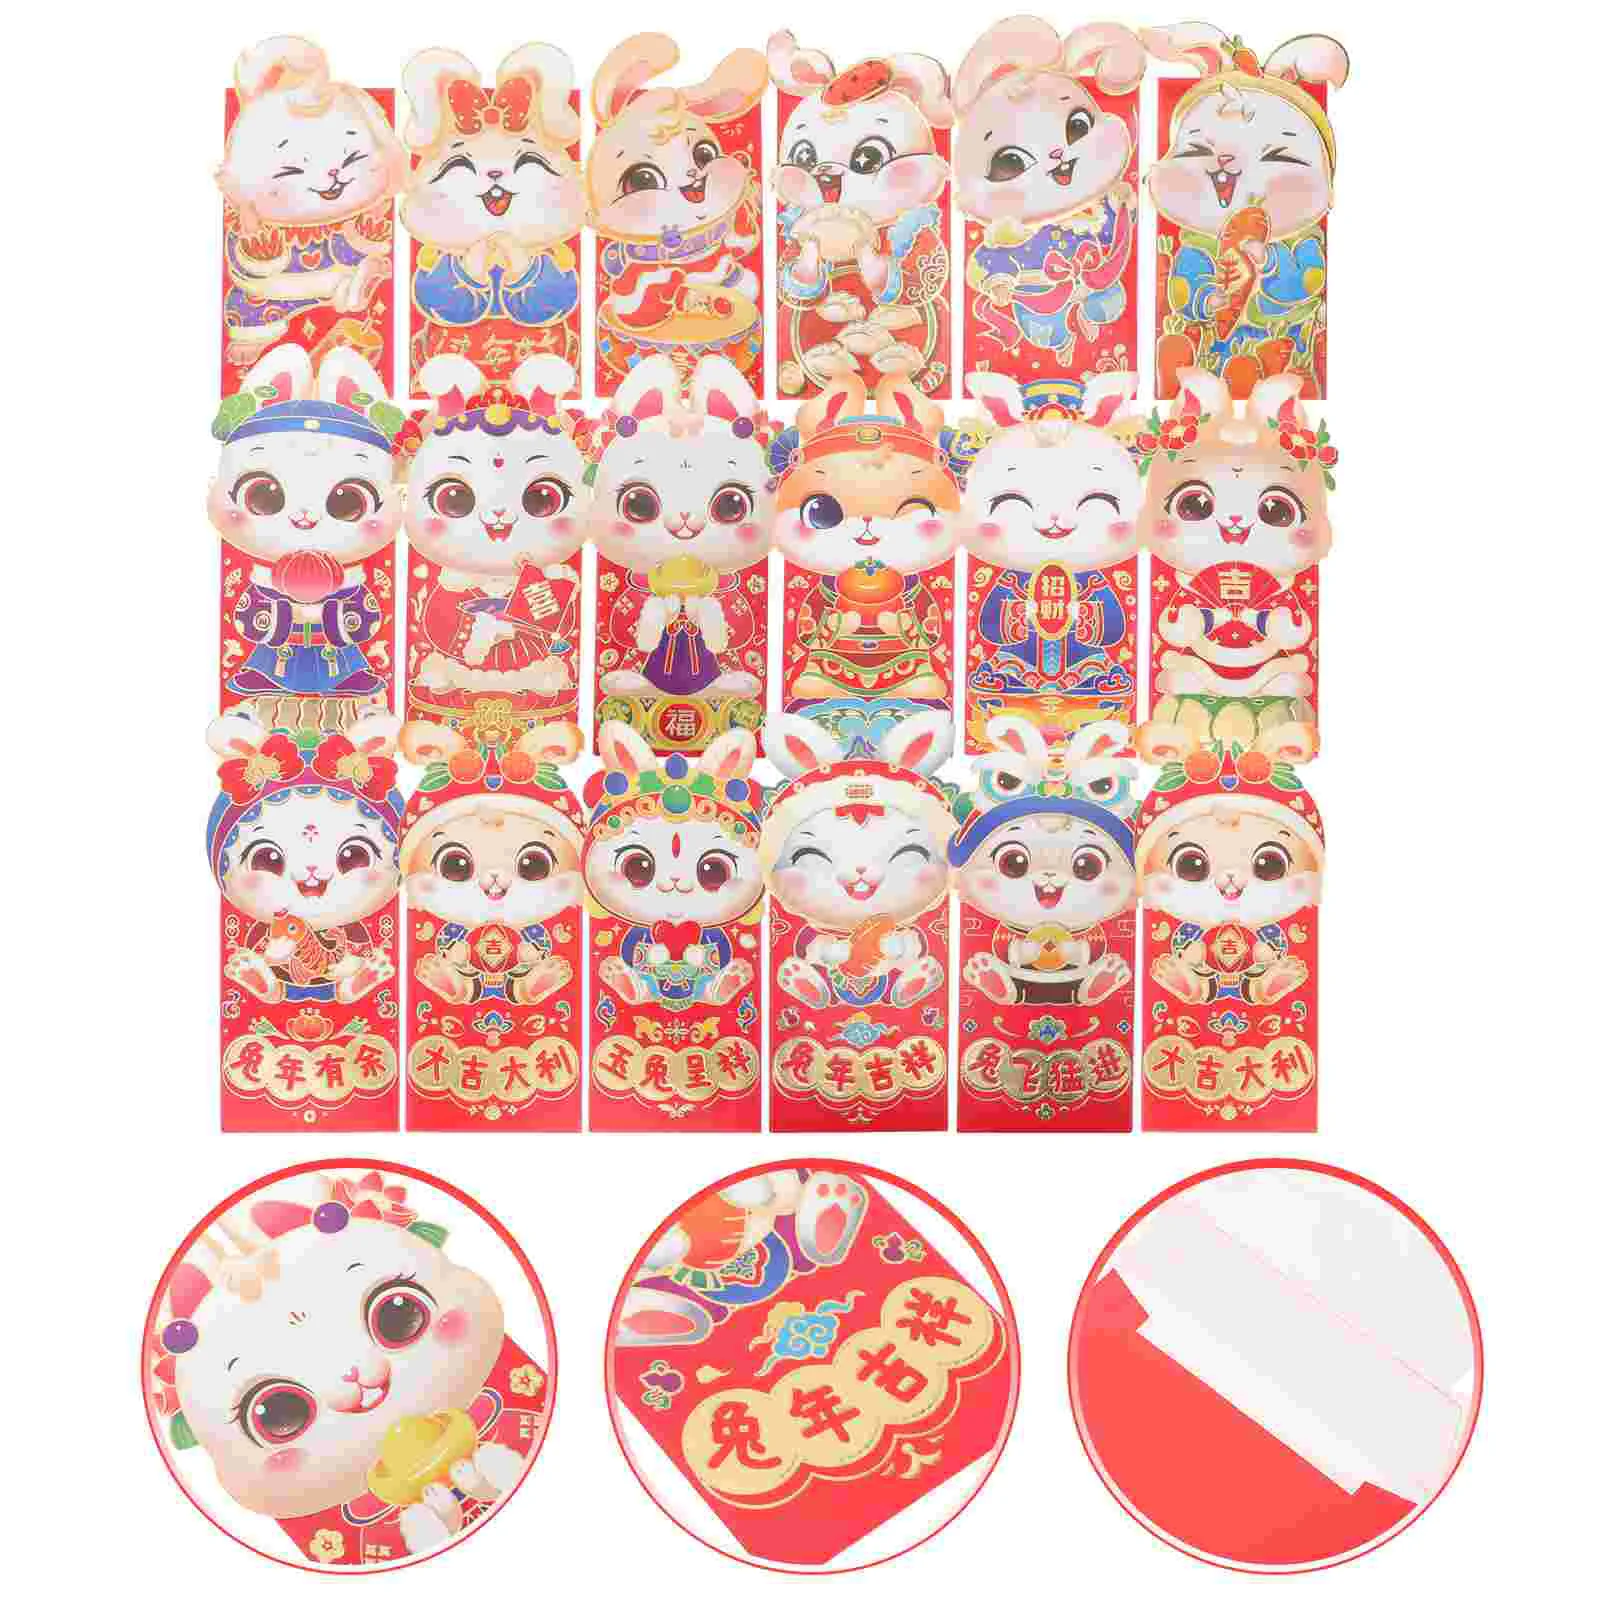 

Red Year New Envelope Envelopes Chinese Money Packet Rabbit Lucky Packets Festival Springhong Bao Thepocket Zodiac Luck Pockets